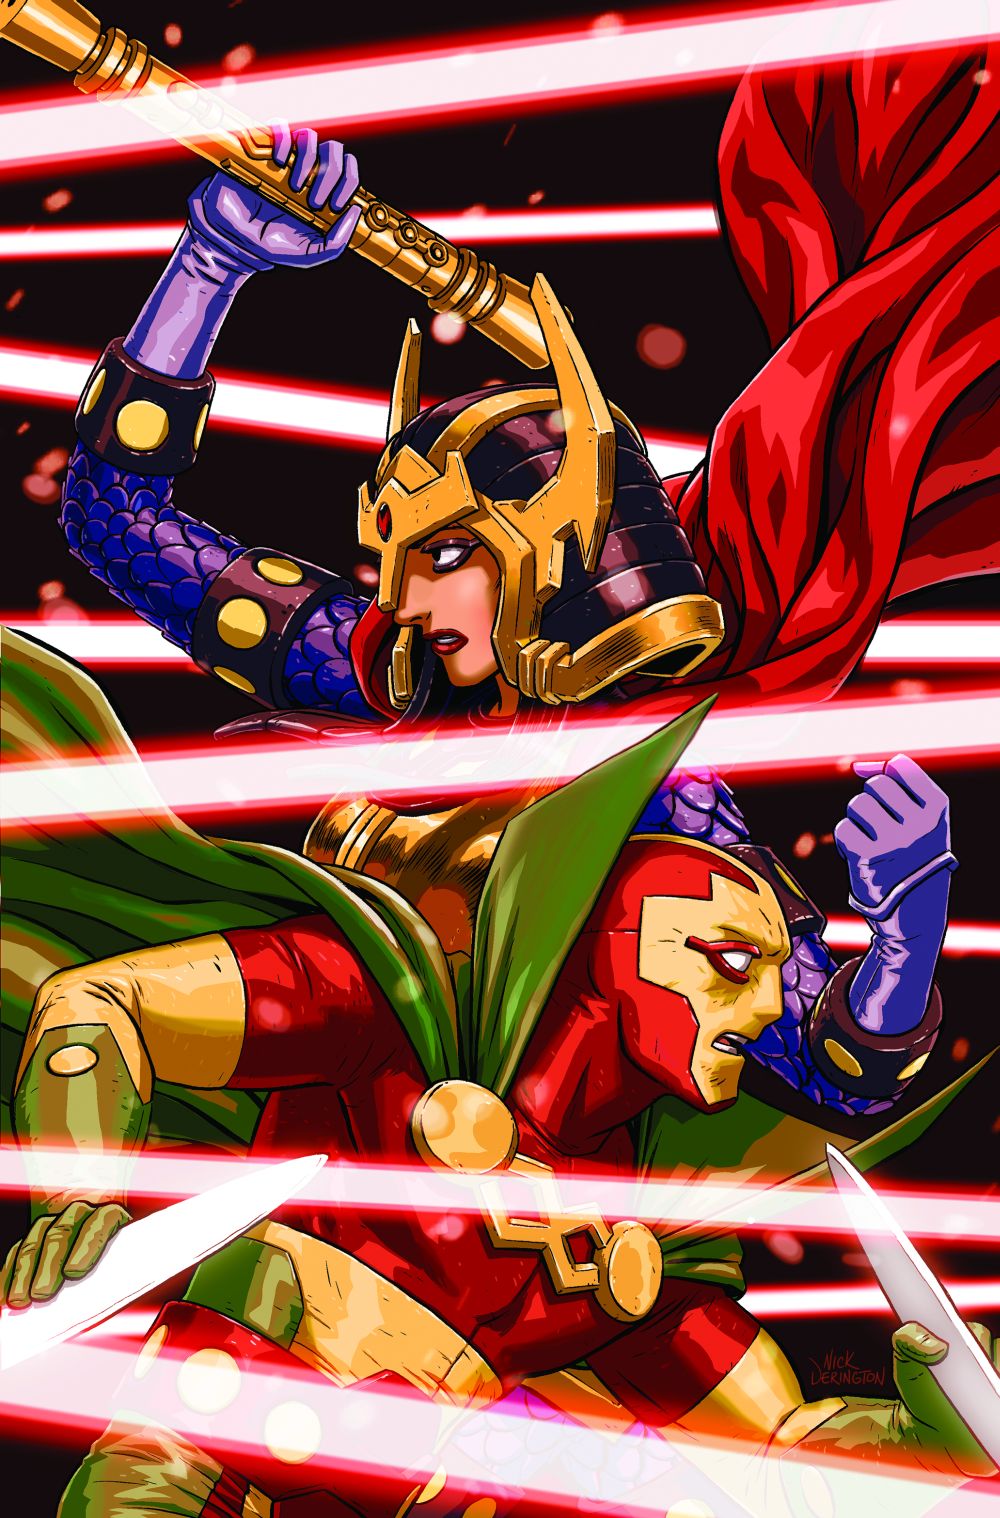 MISTER MIRACLE #6